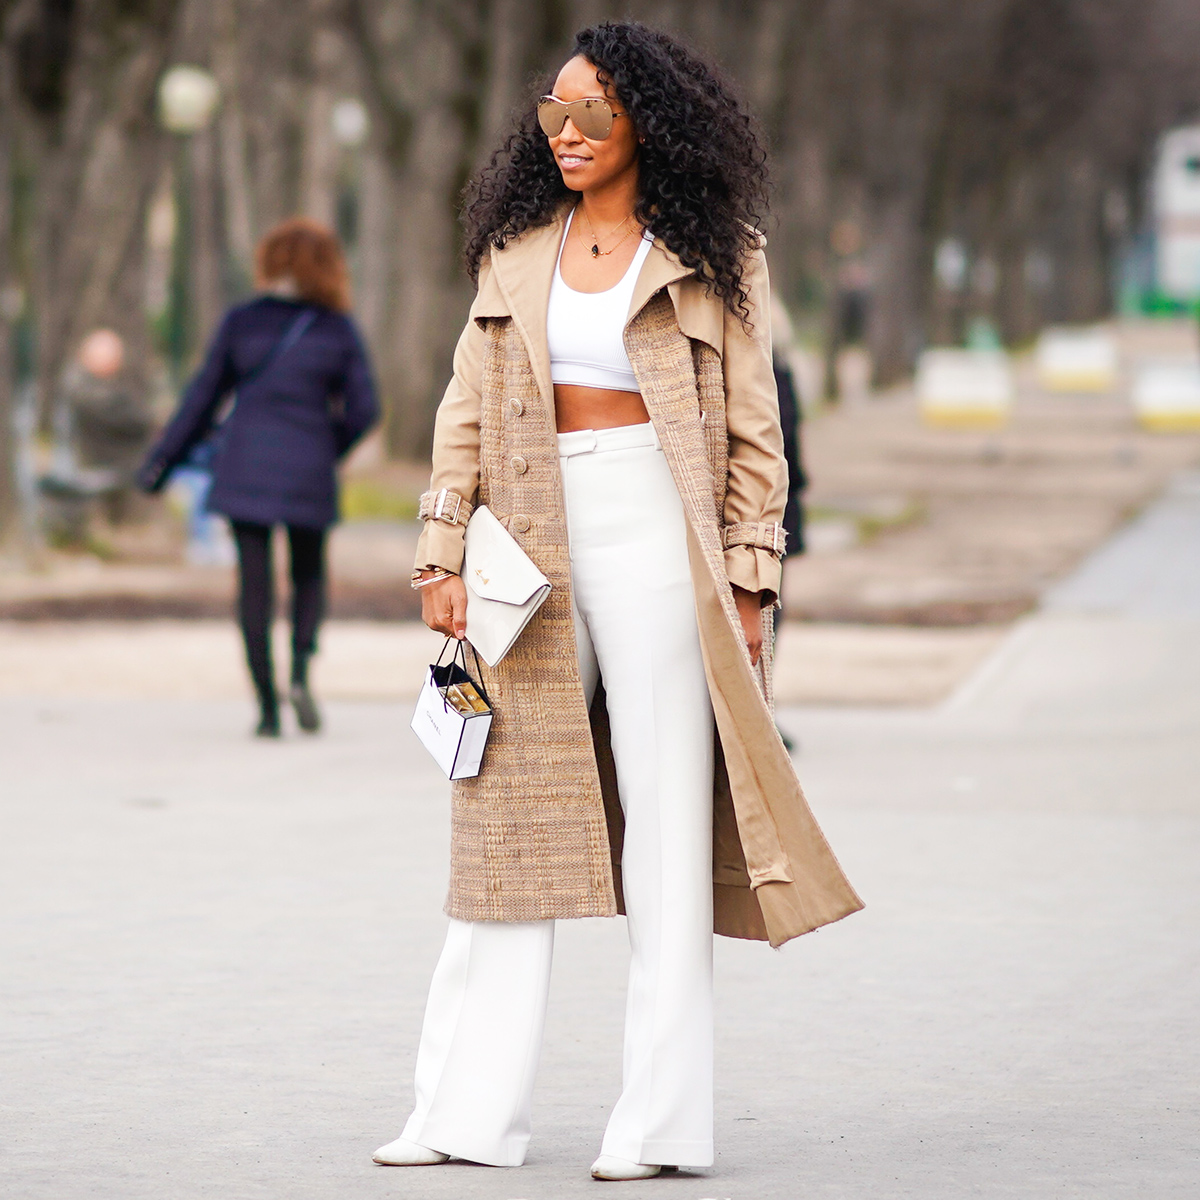 How to Wear Wide-Leg Pants - Closetful of Clothes